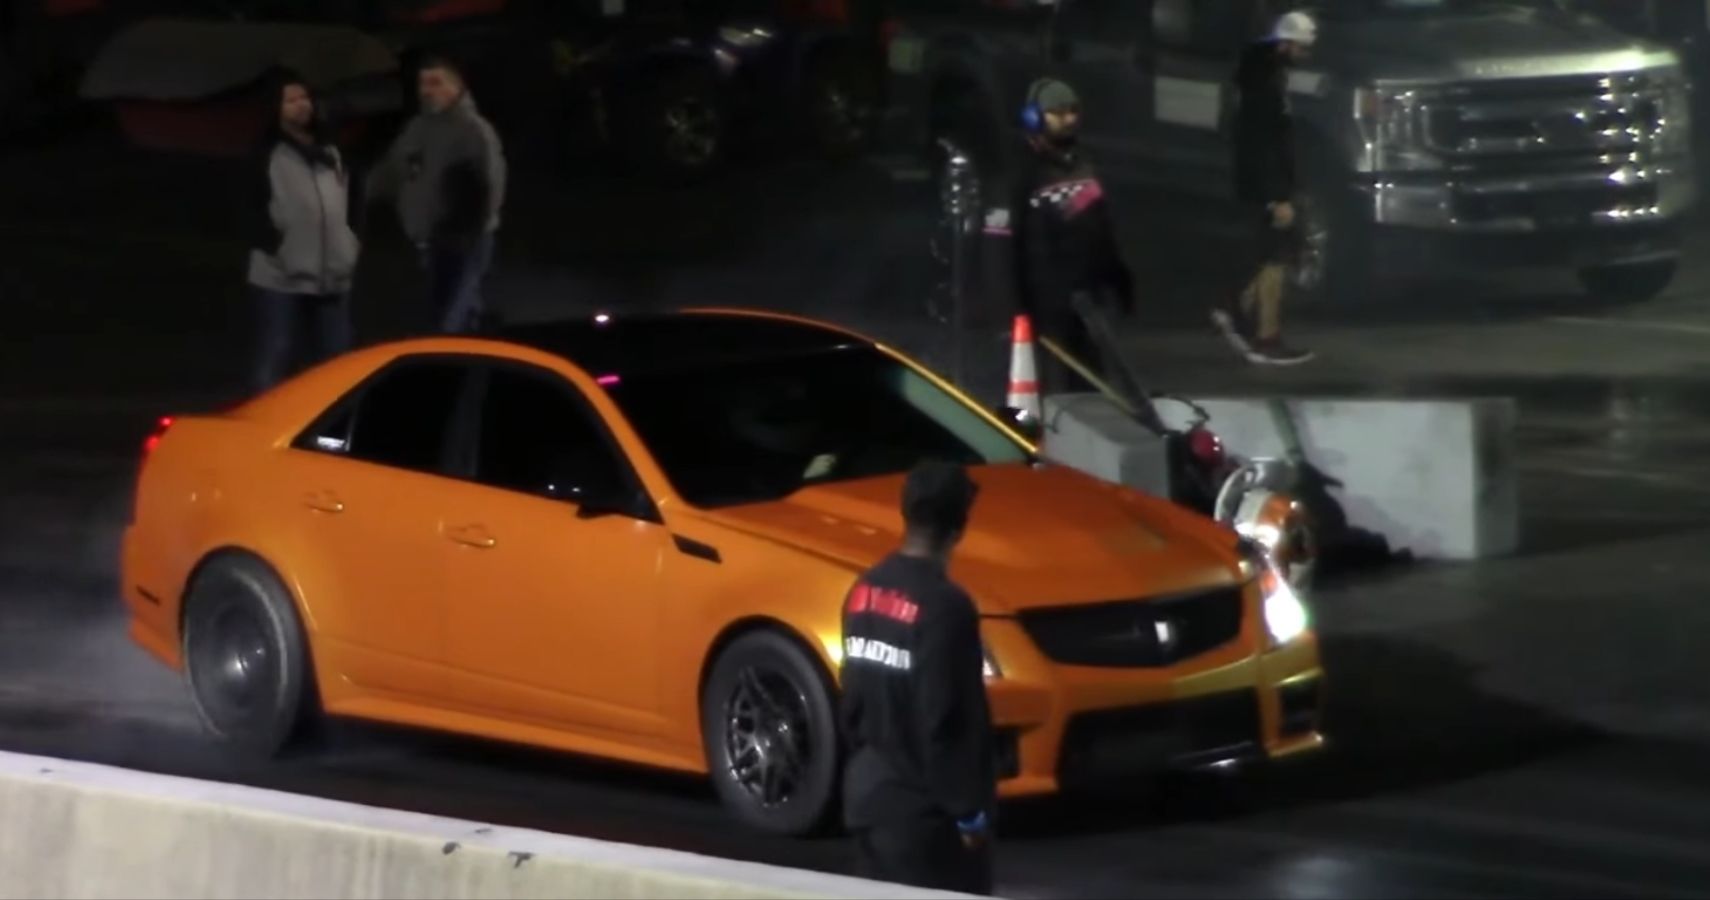 Orange Cadillac CTS-V at the start of the drag race - nickname is Rocket